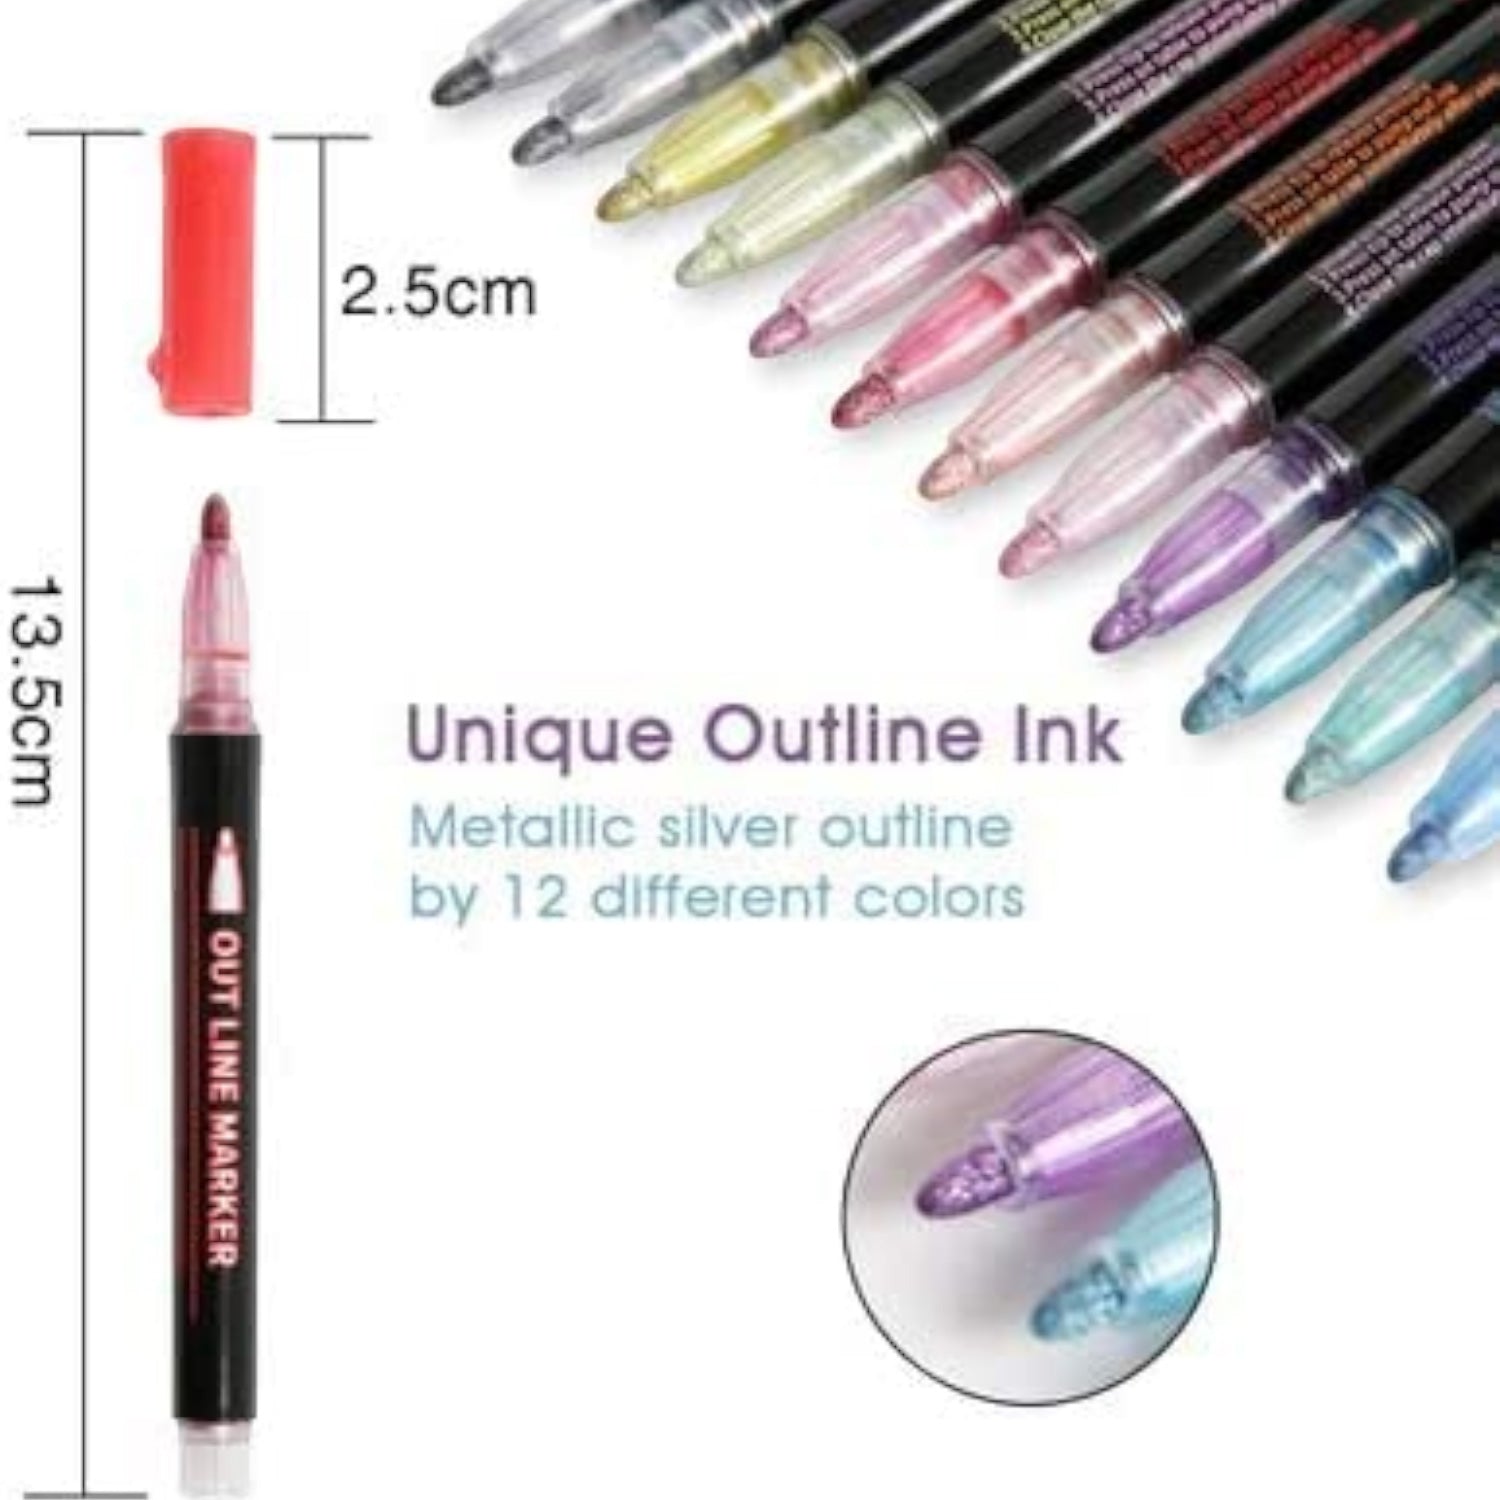 Marker Highlighters Pen | Out Line Pens in 12 Colors - for Girls, Boys, School, Crafts, Drawing, Birthday Gift & Return Gifts - Apkamart